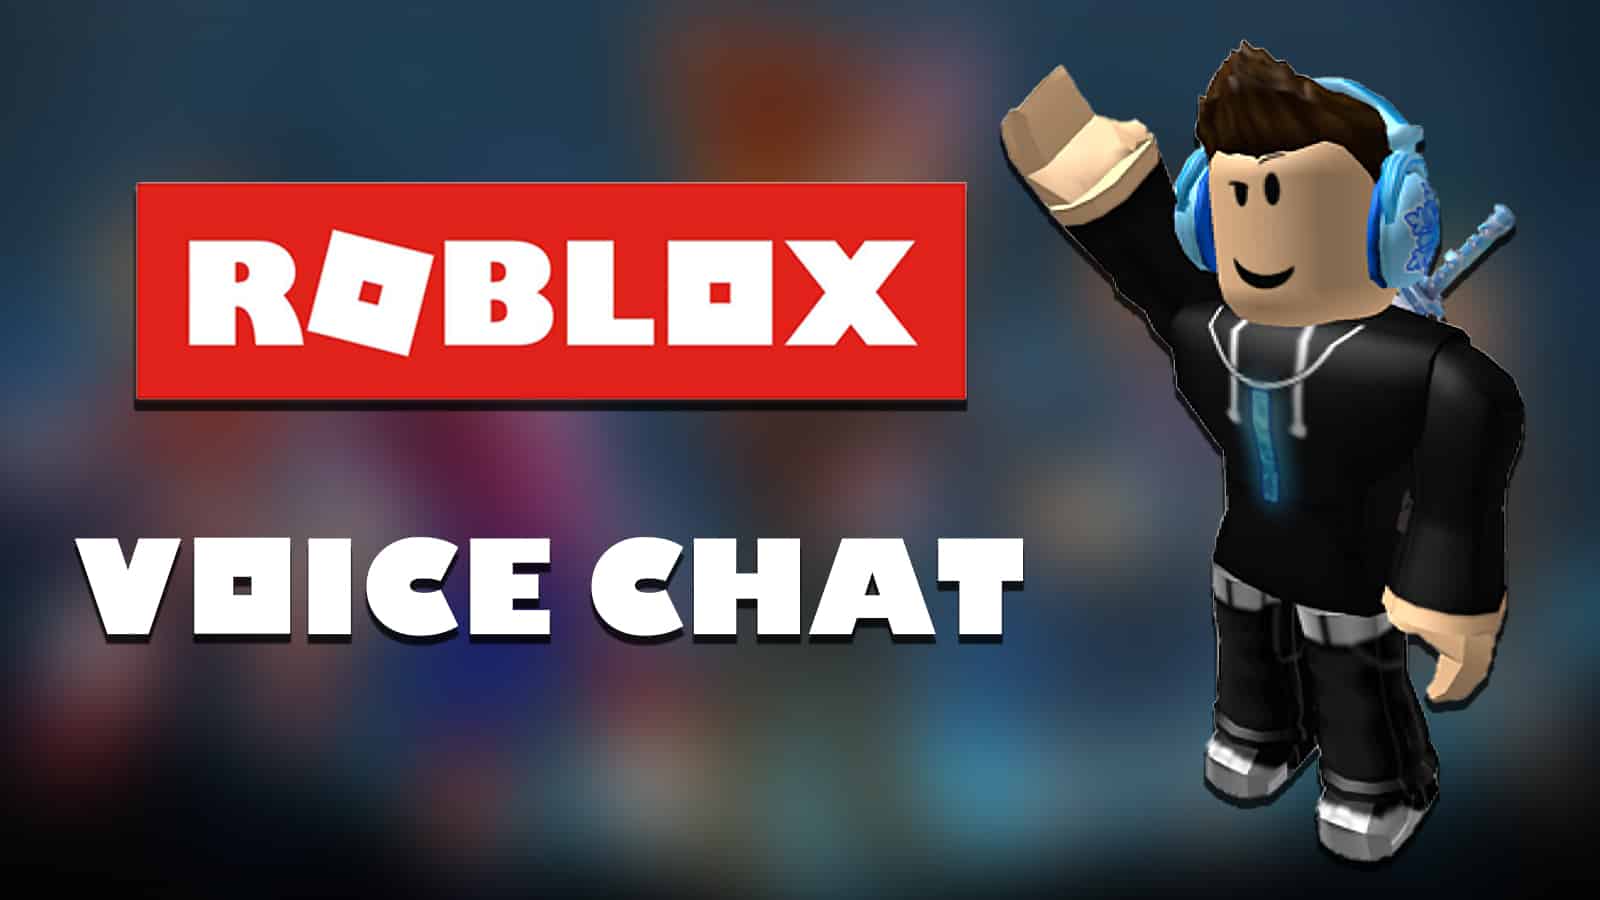 Voice chat feature in Roblox needs age verification